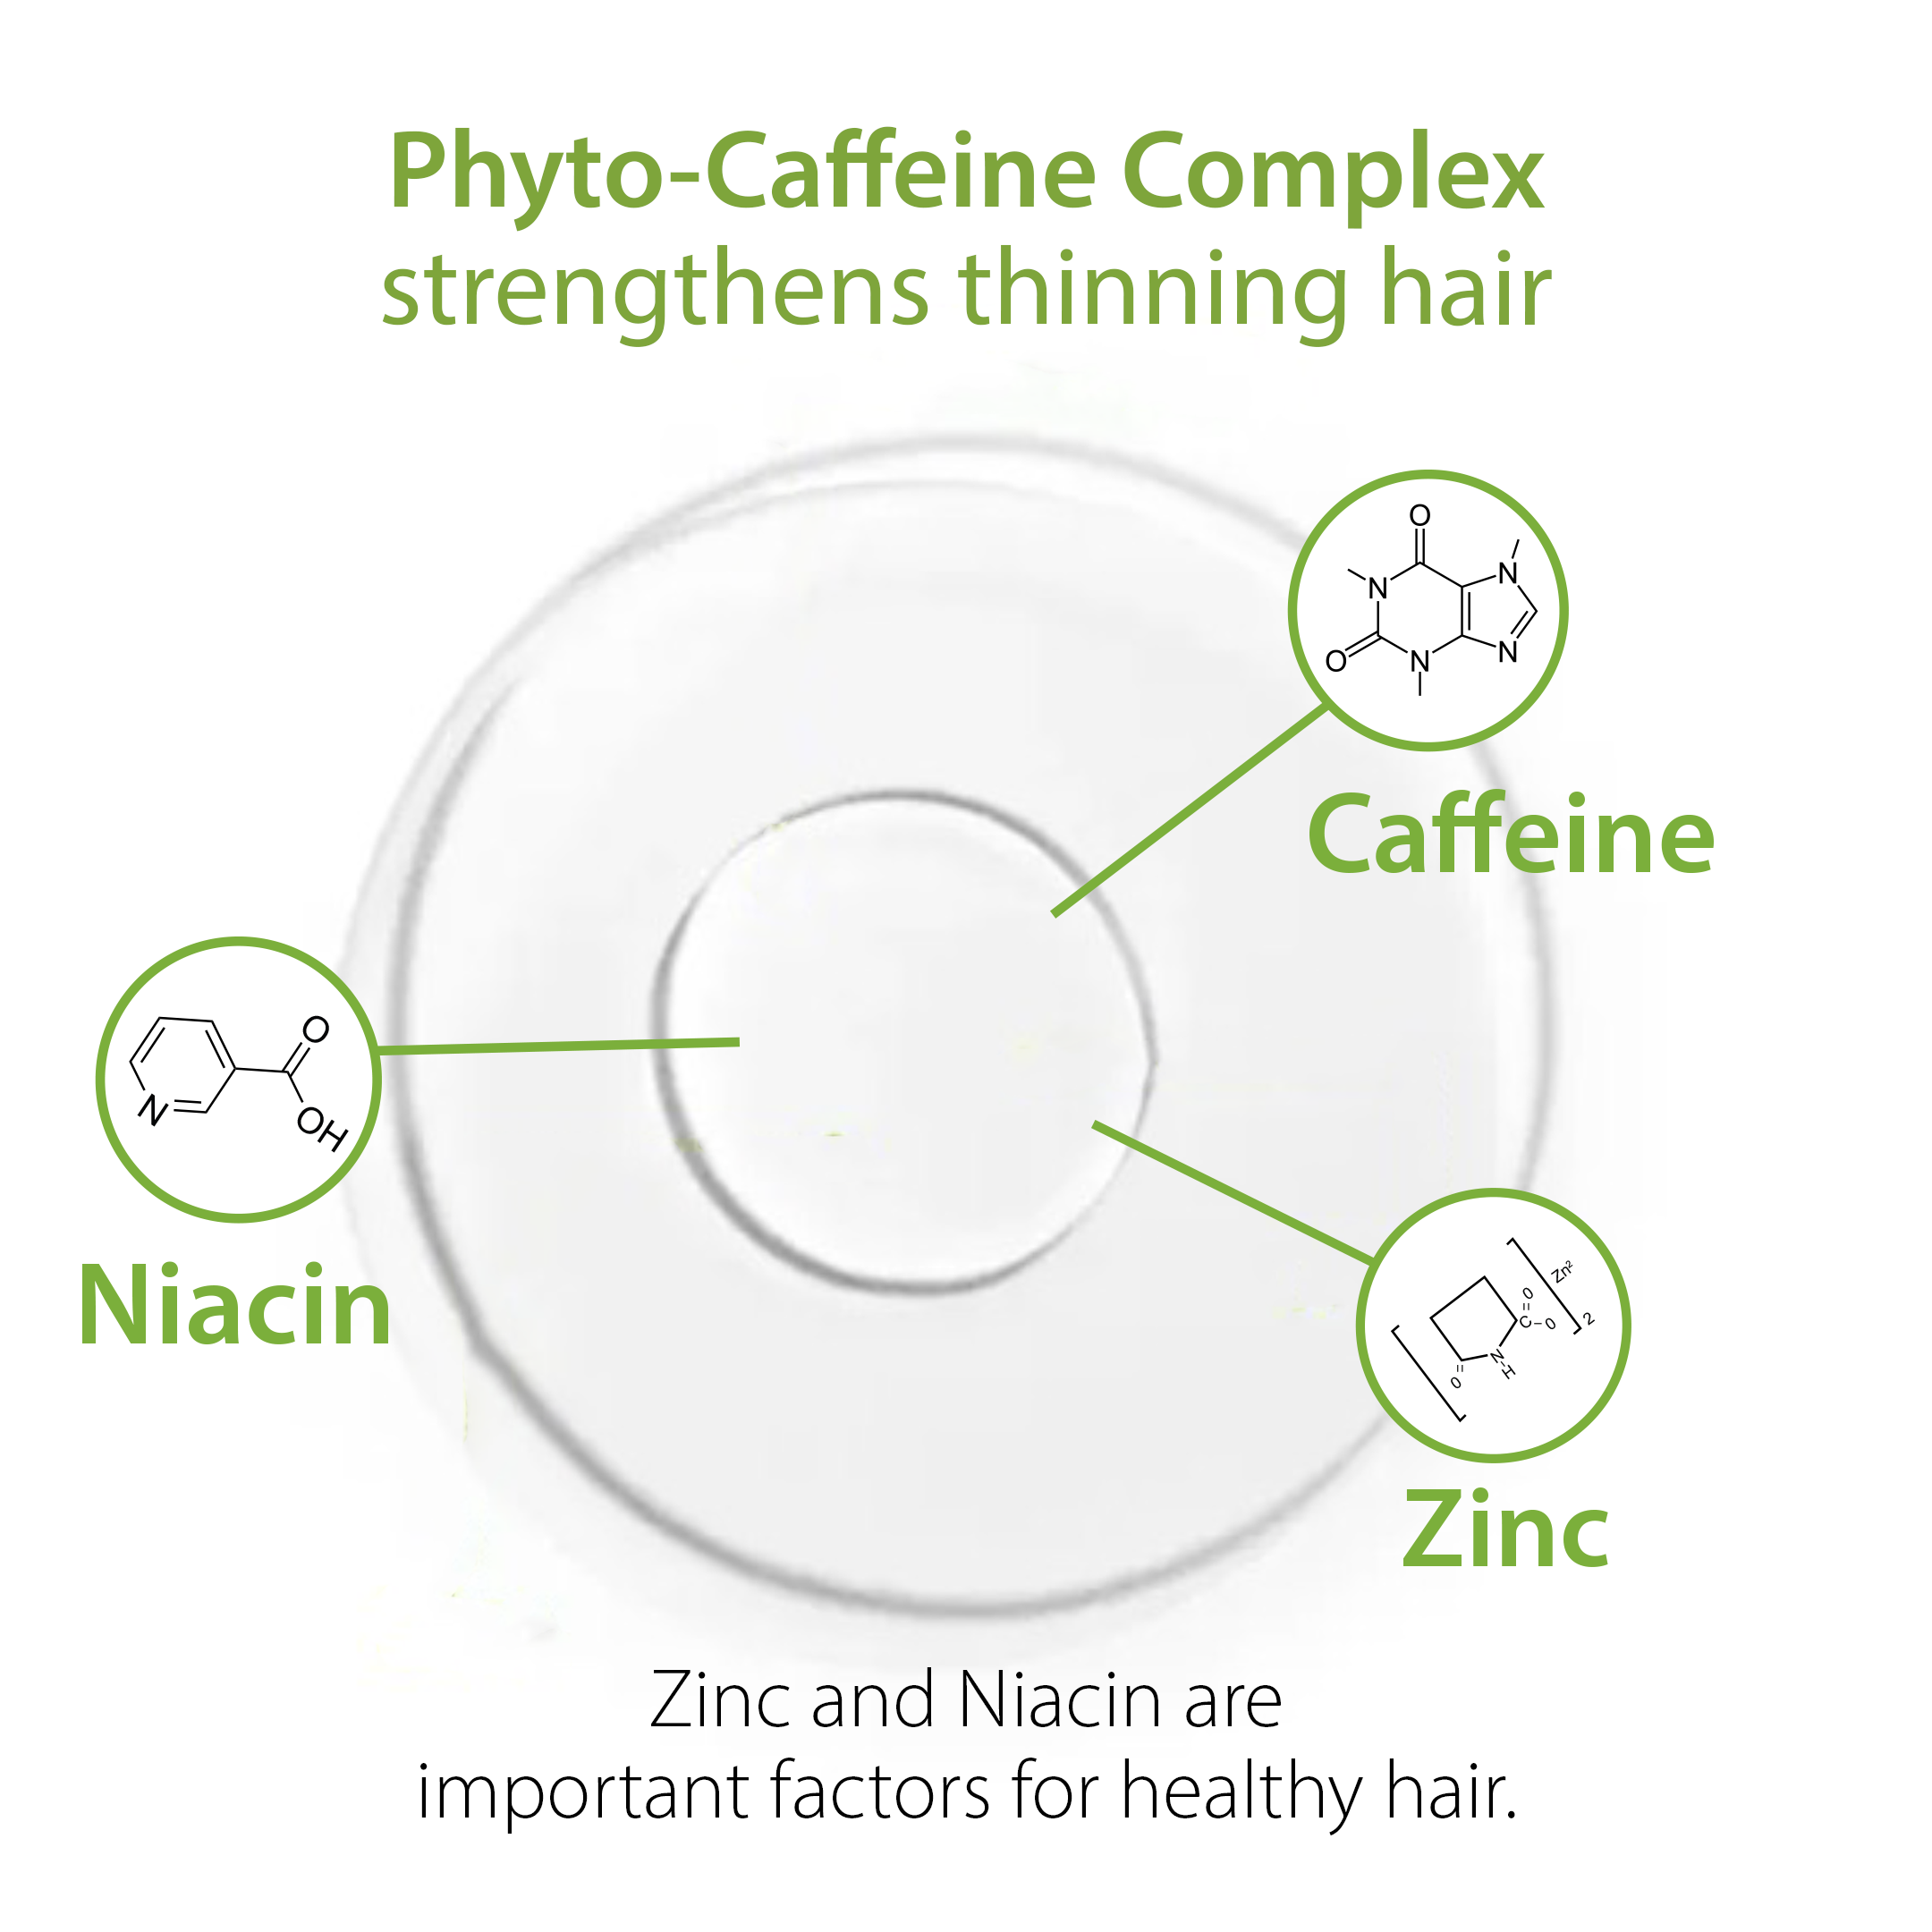 Plantur 39 Phyto-Caffeine Shampoo, Conditioner, Tonic for Colored, Stressed Hair